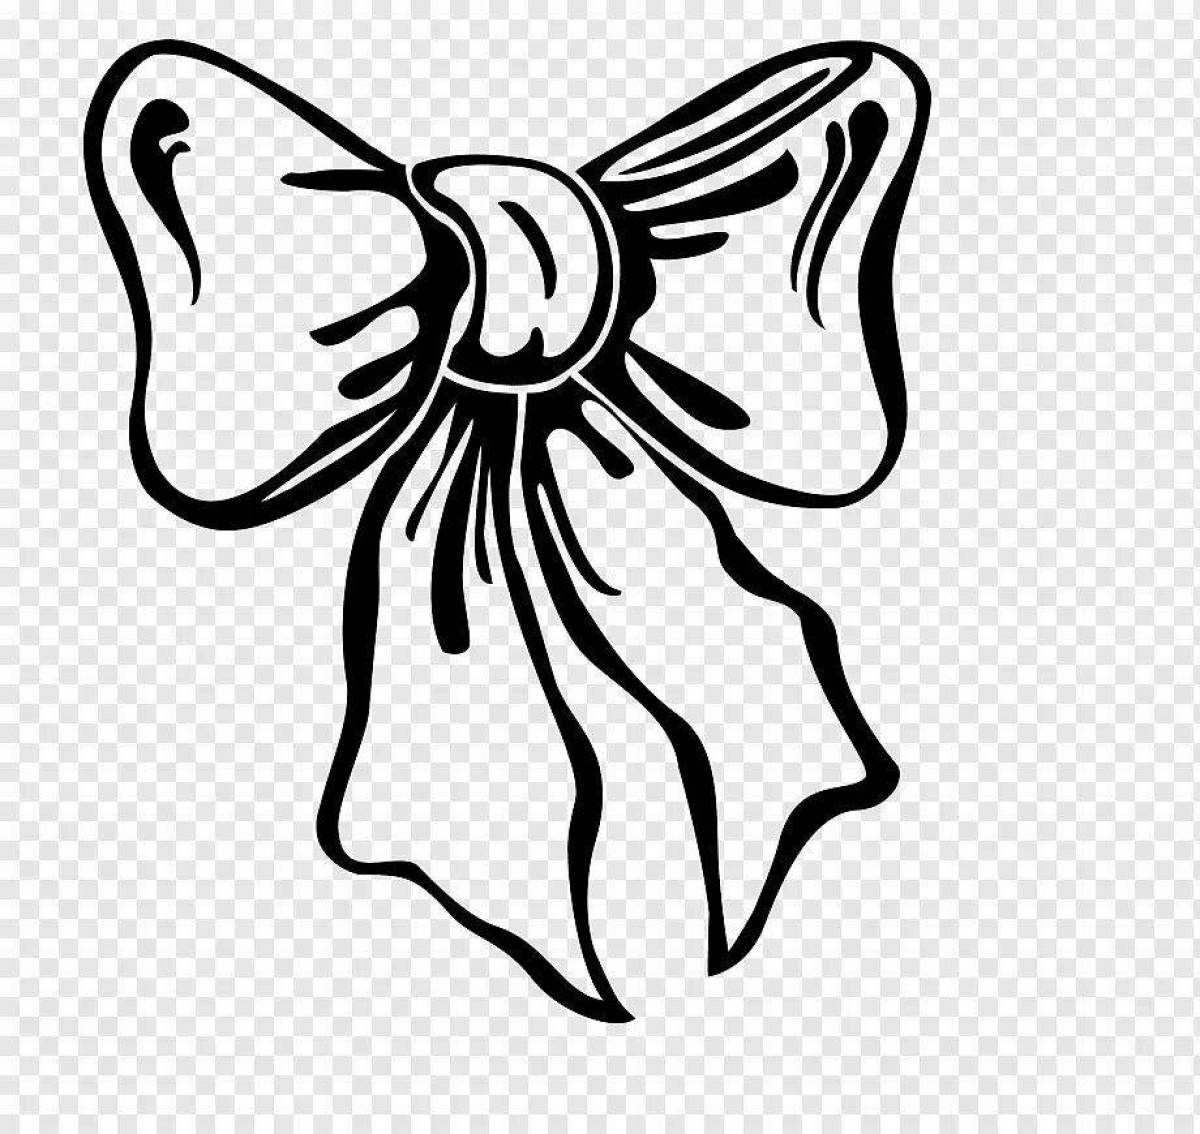 Coloring page bow for the little ones